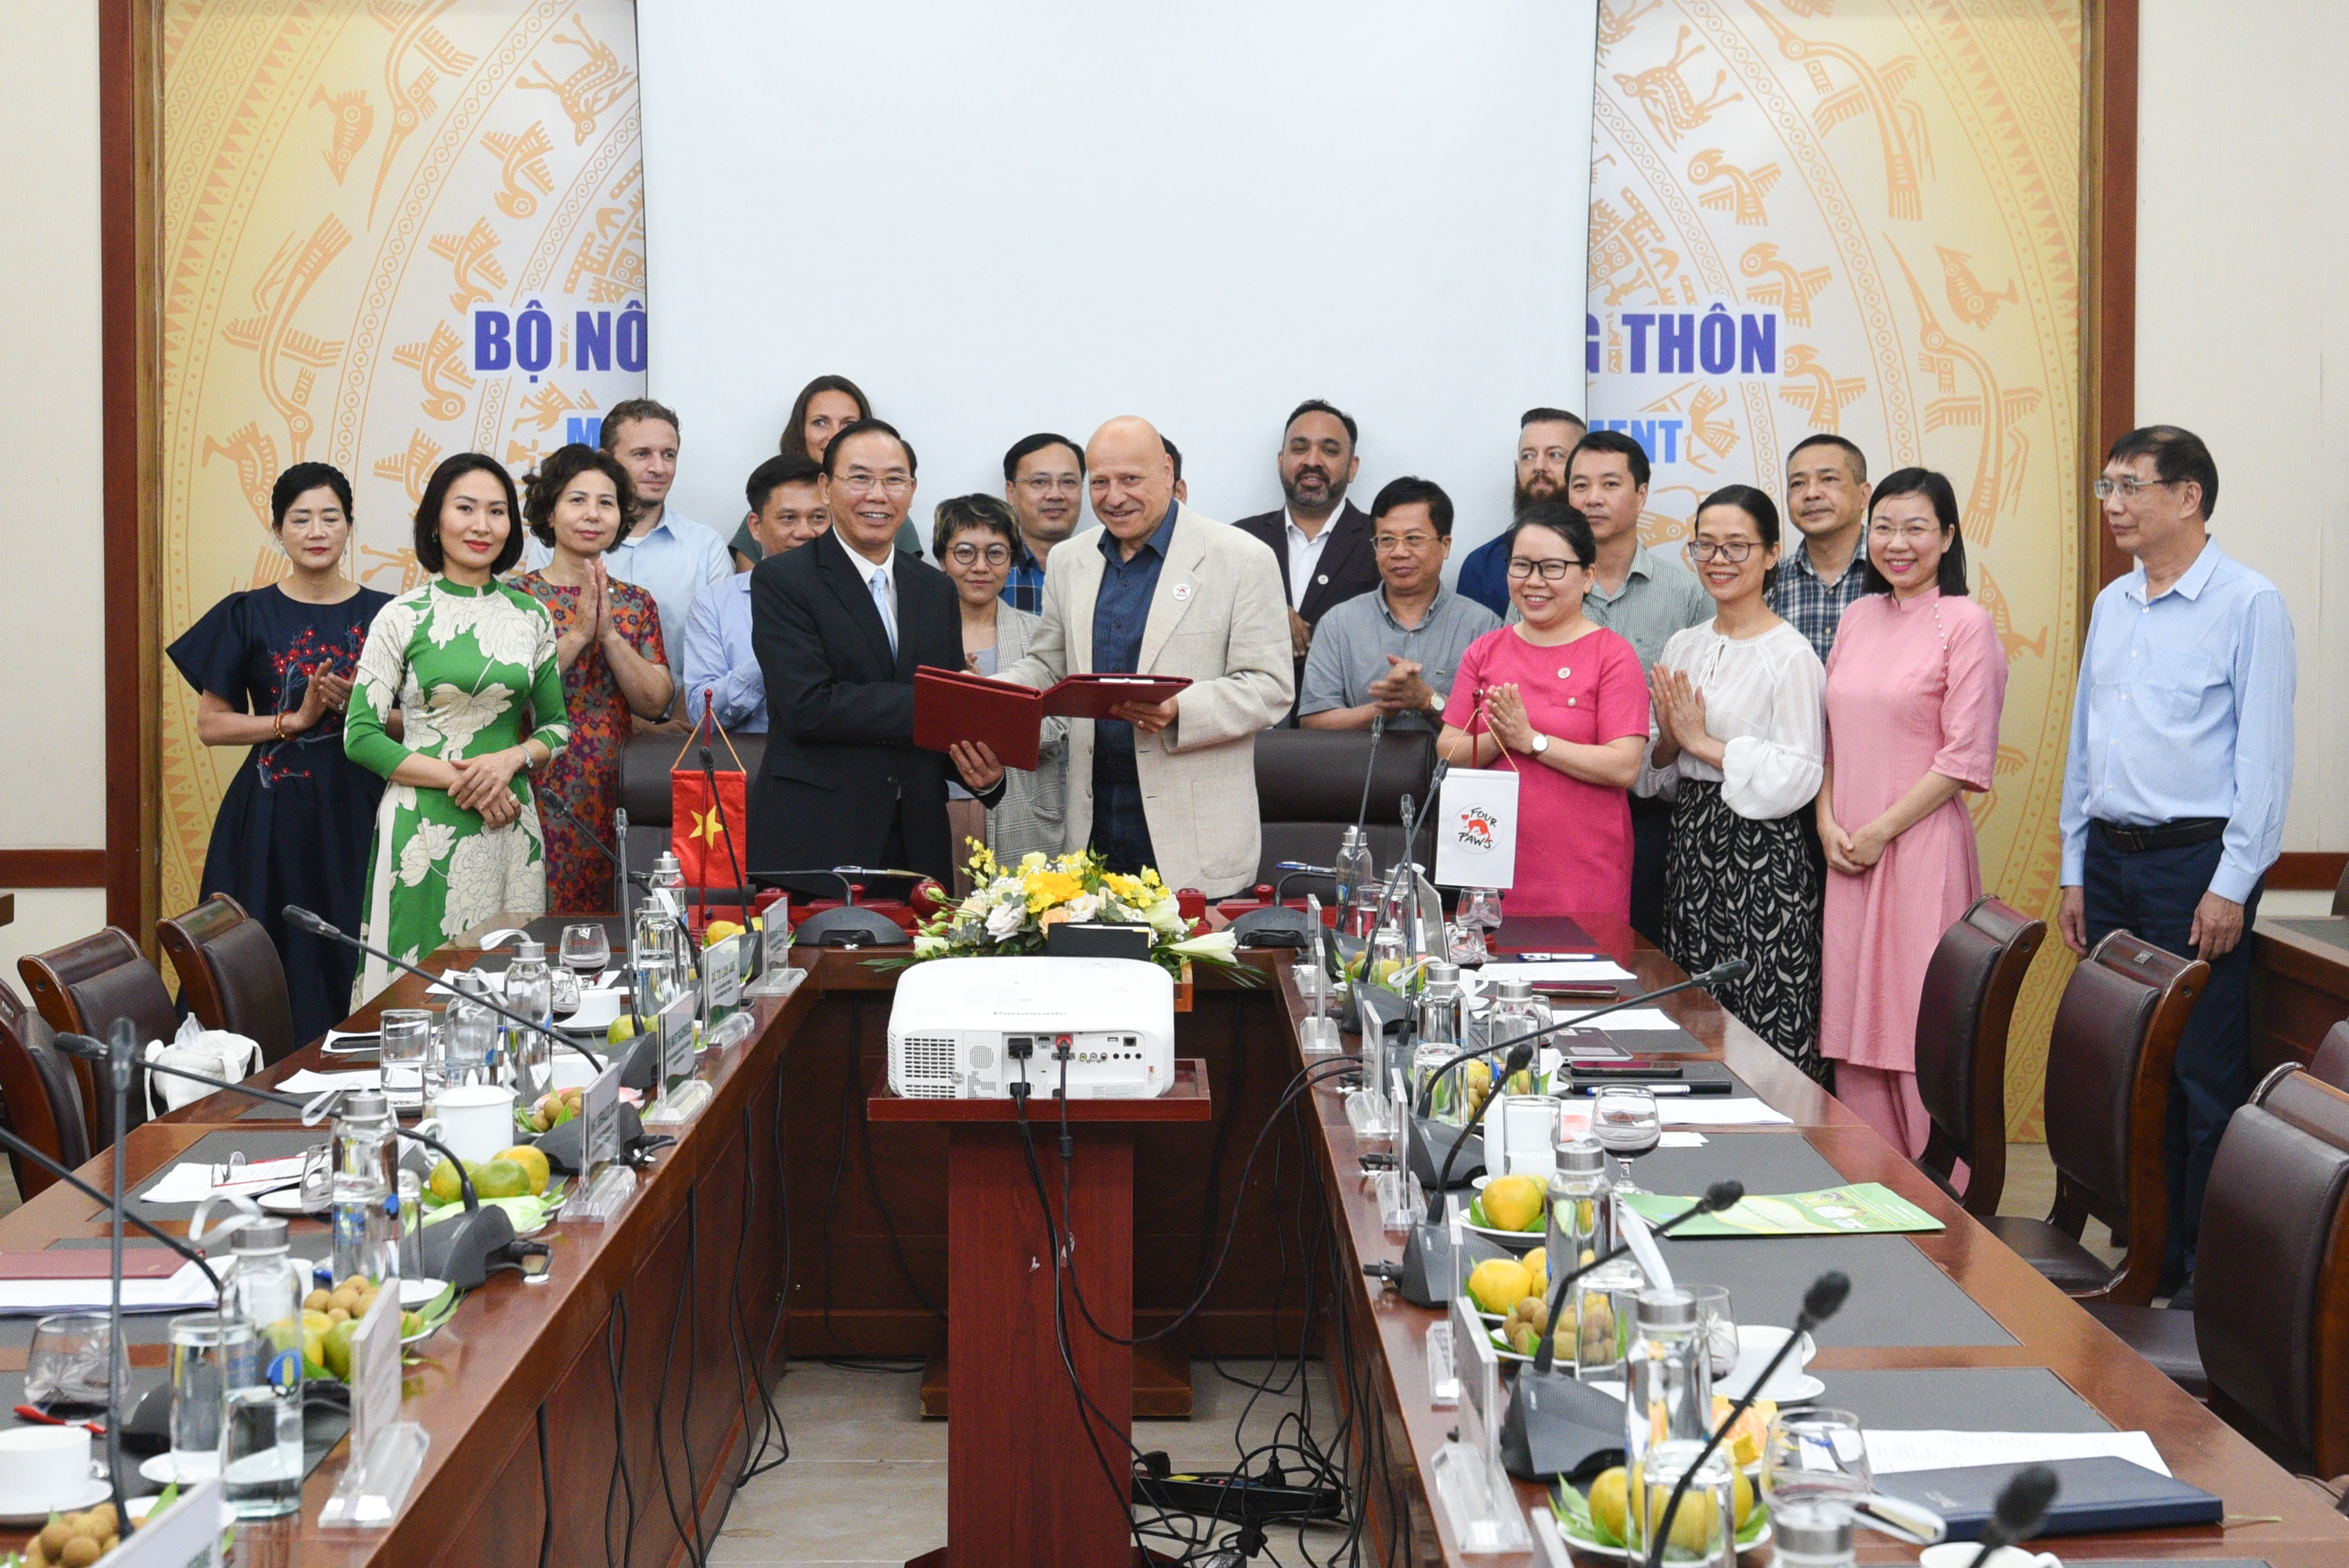 Deputy Minister Phung Duc Tien and Mr. Gerald Dick signed a memorandum of understanding to join the One Health Partnership framework of FOUR PAWS International. Photo: Tung Dinh.